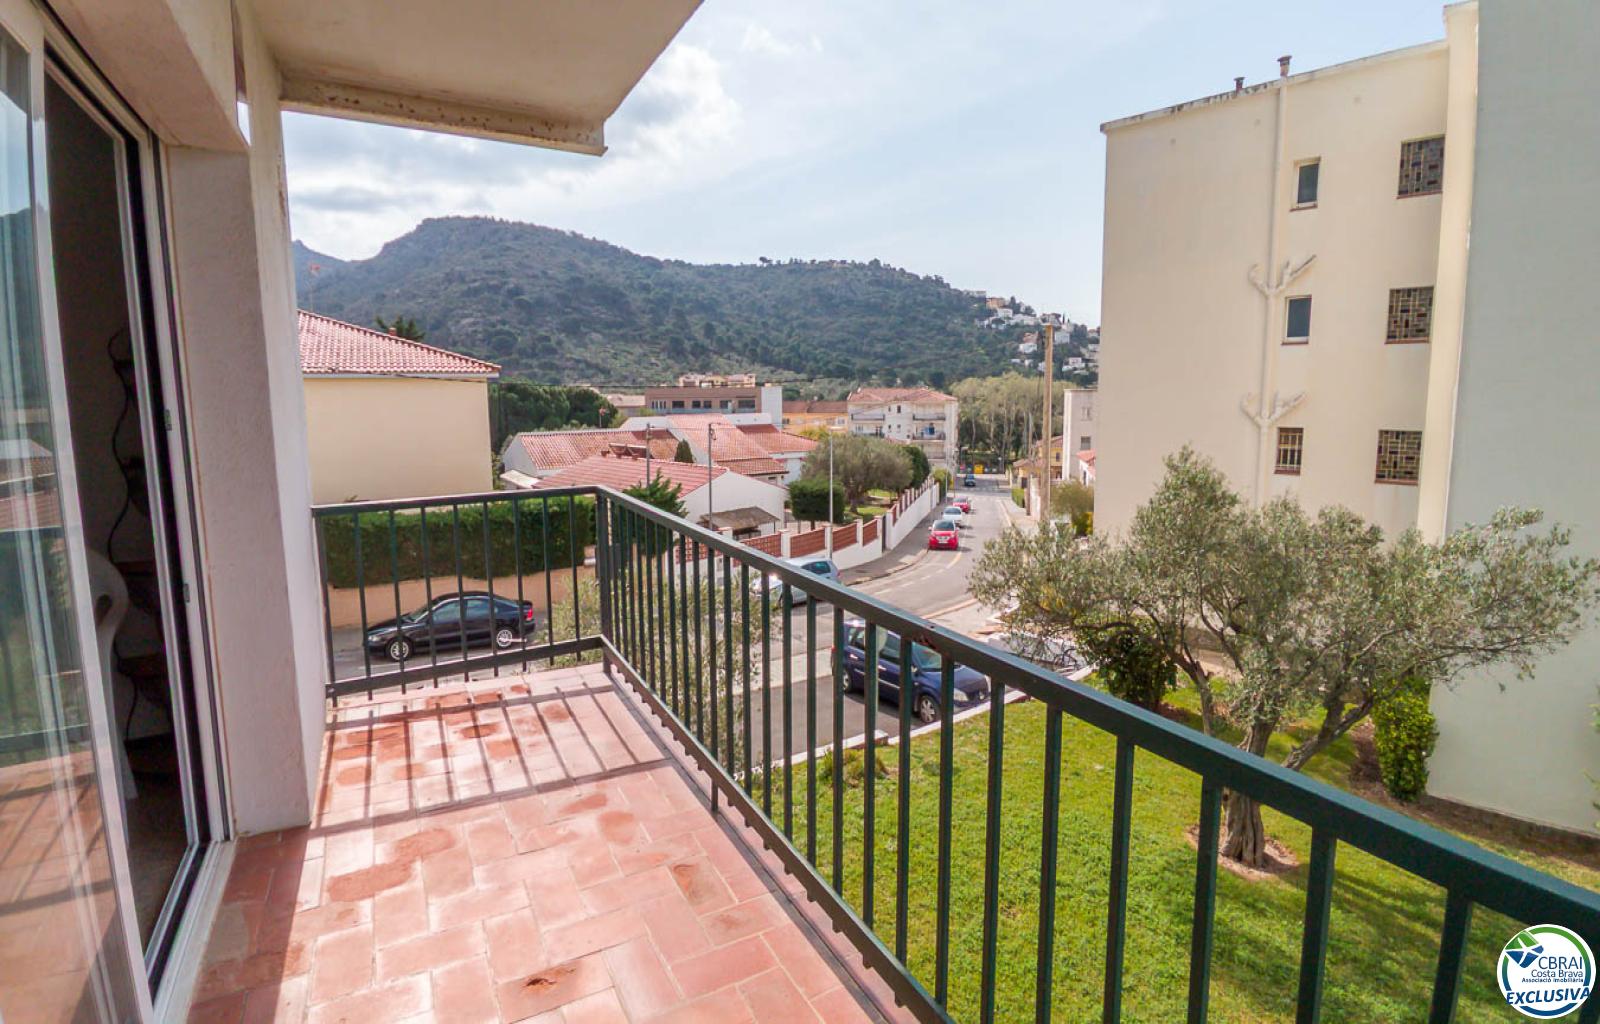 3 bedroom flat with communal swimming pool